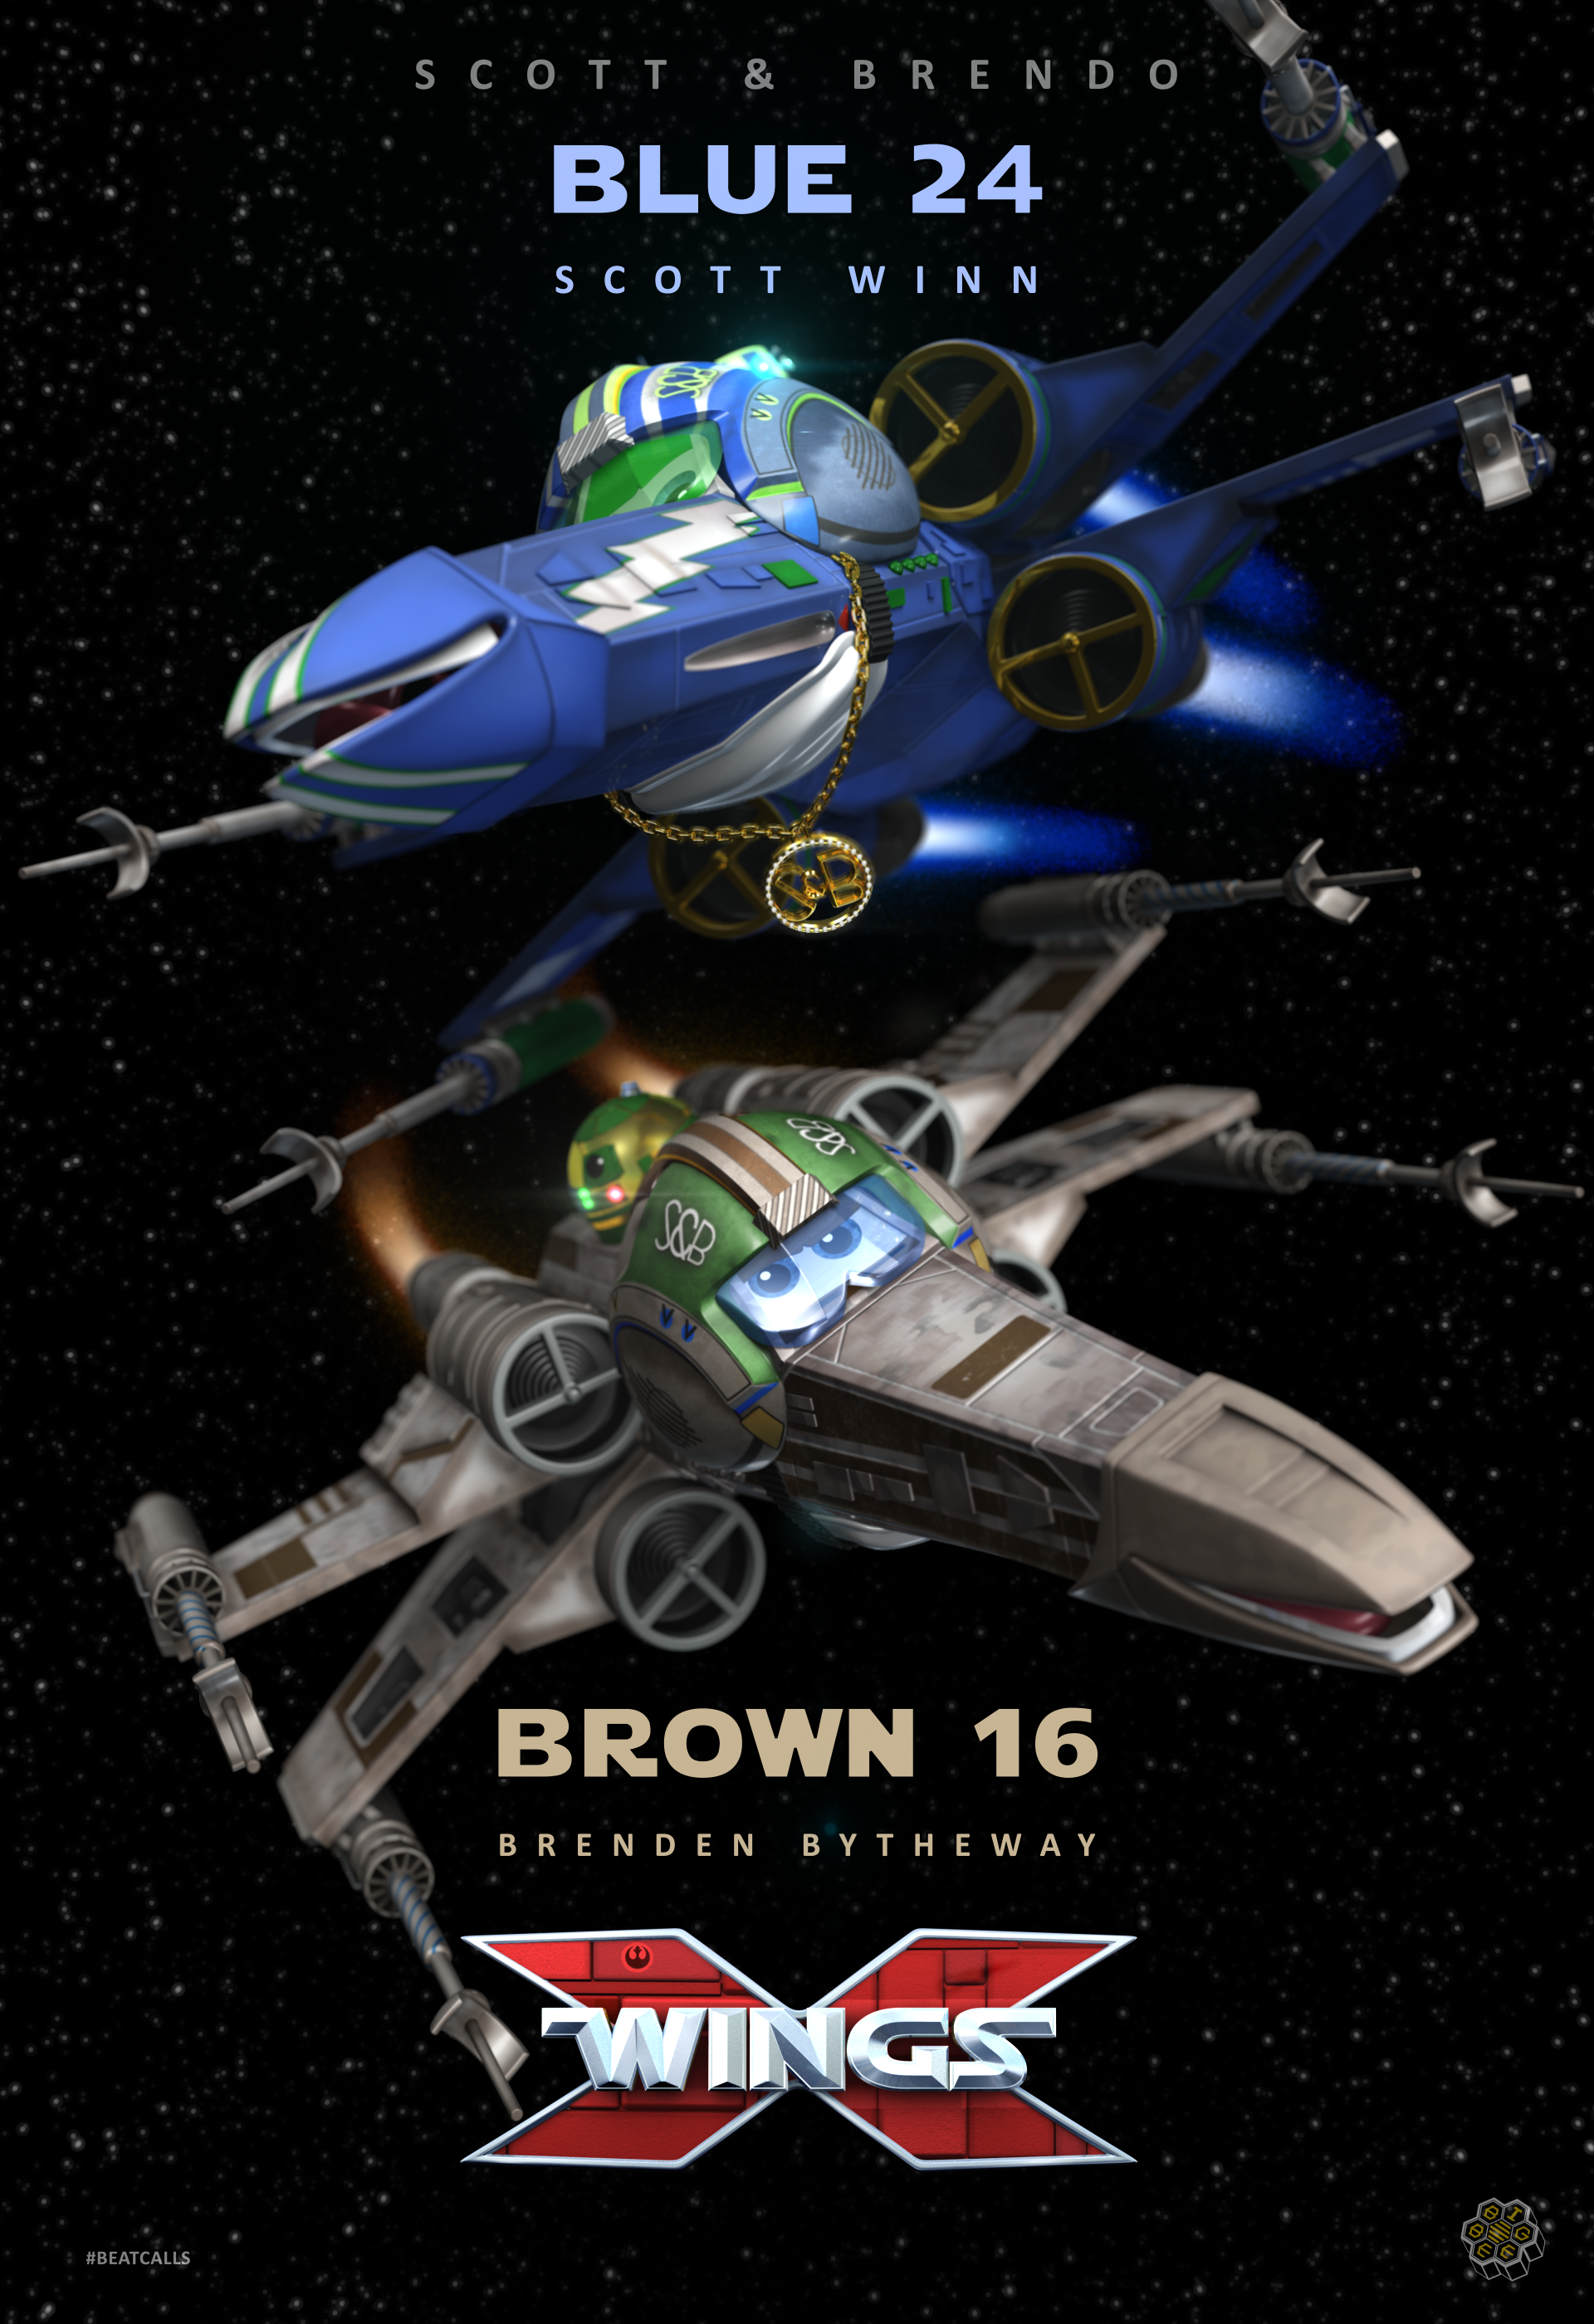 What if Disney-Pixar did Star Wars? Fan Made Disney-Pixar’s X-Wings Answers This Question.